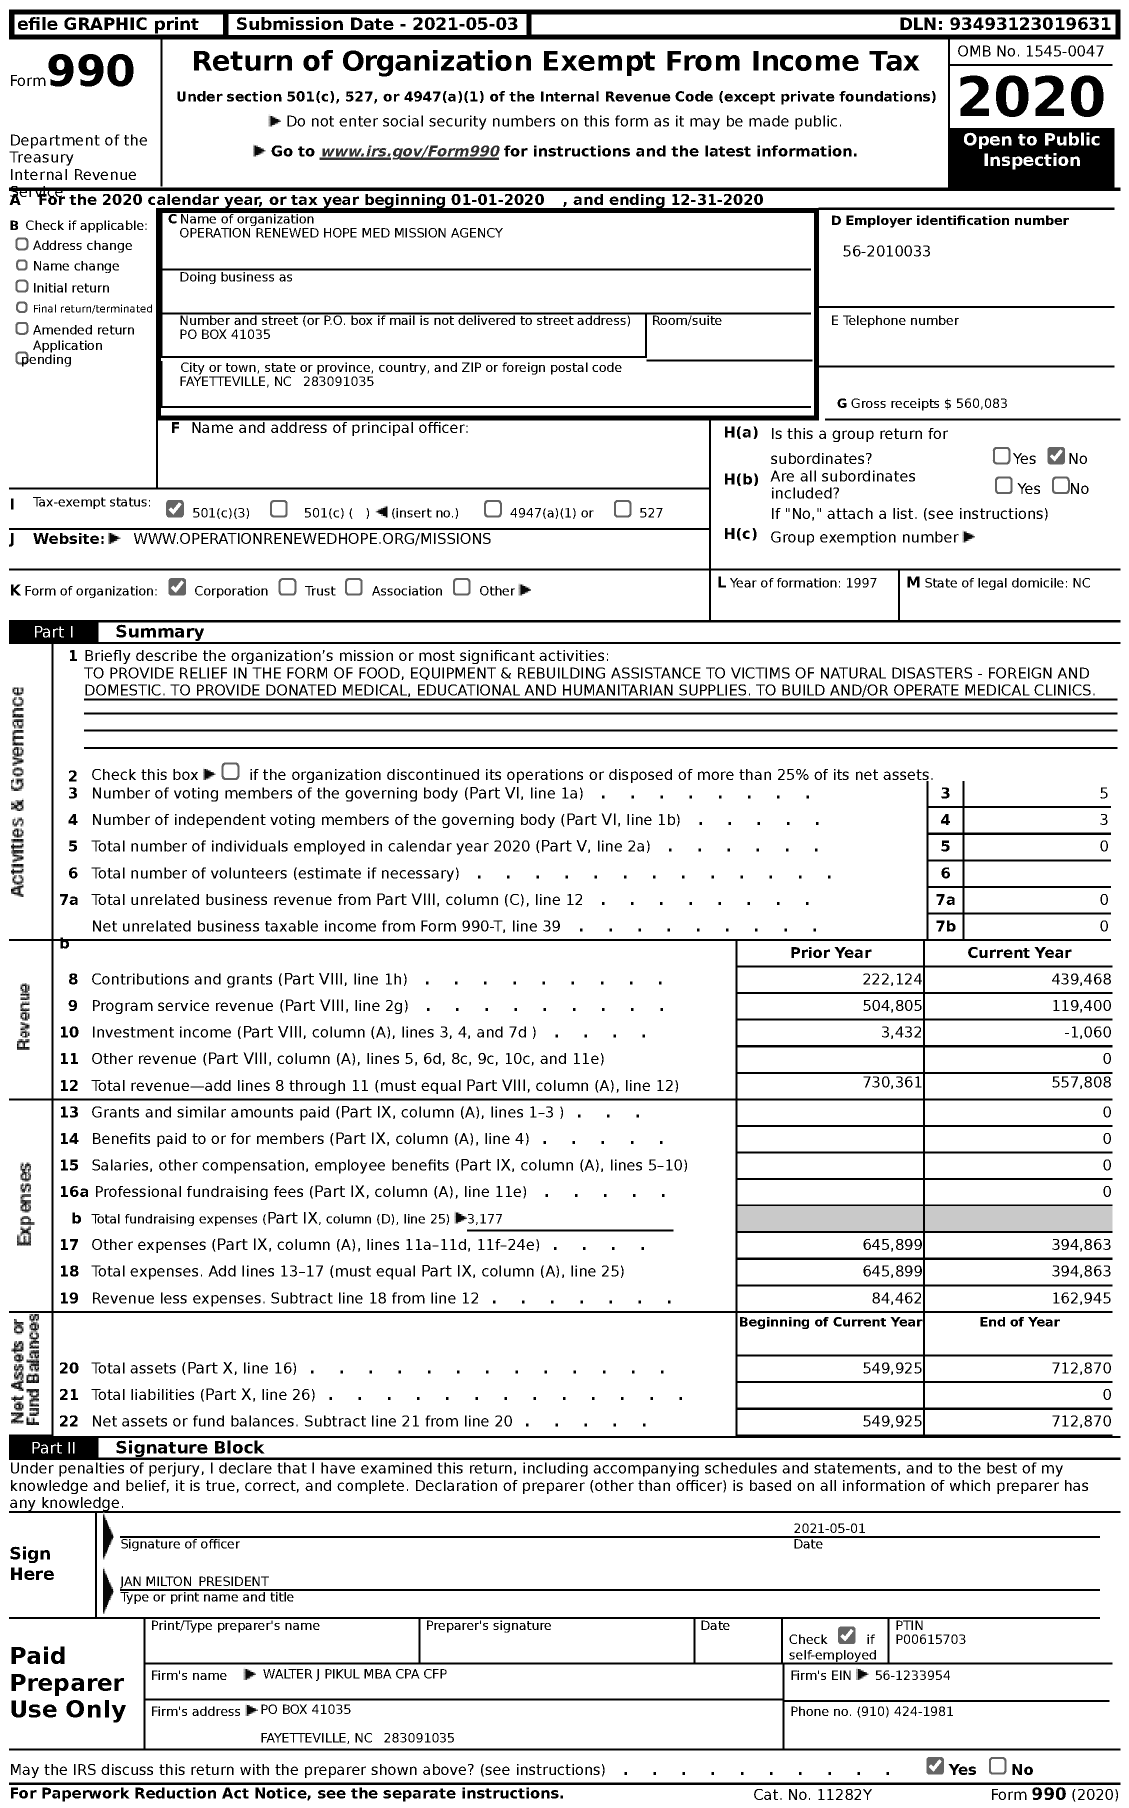 Image of first page of 2020 Form 990 for Operation Renewed Hope Med Mission Agency